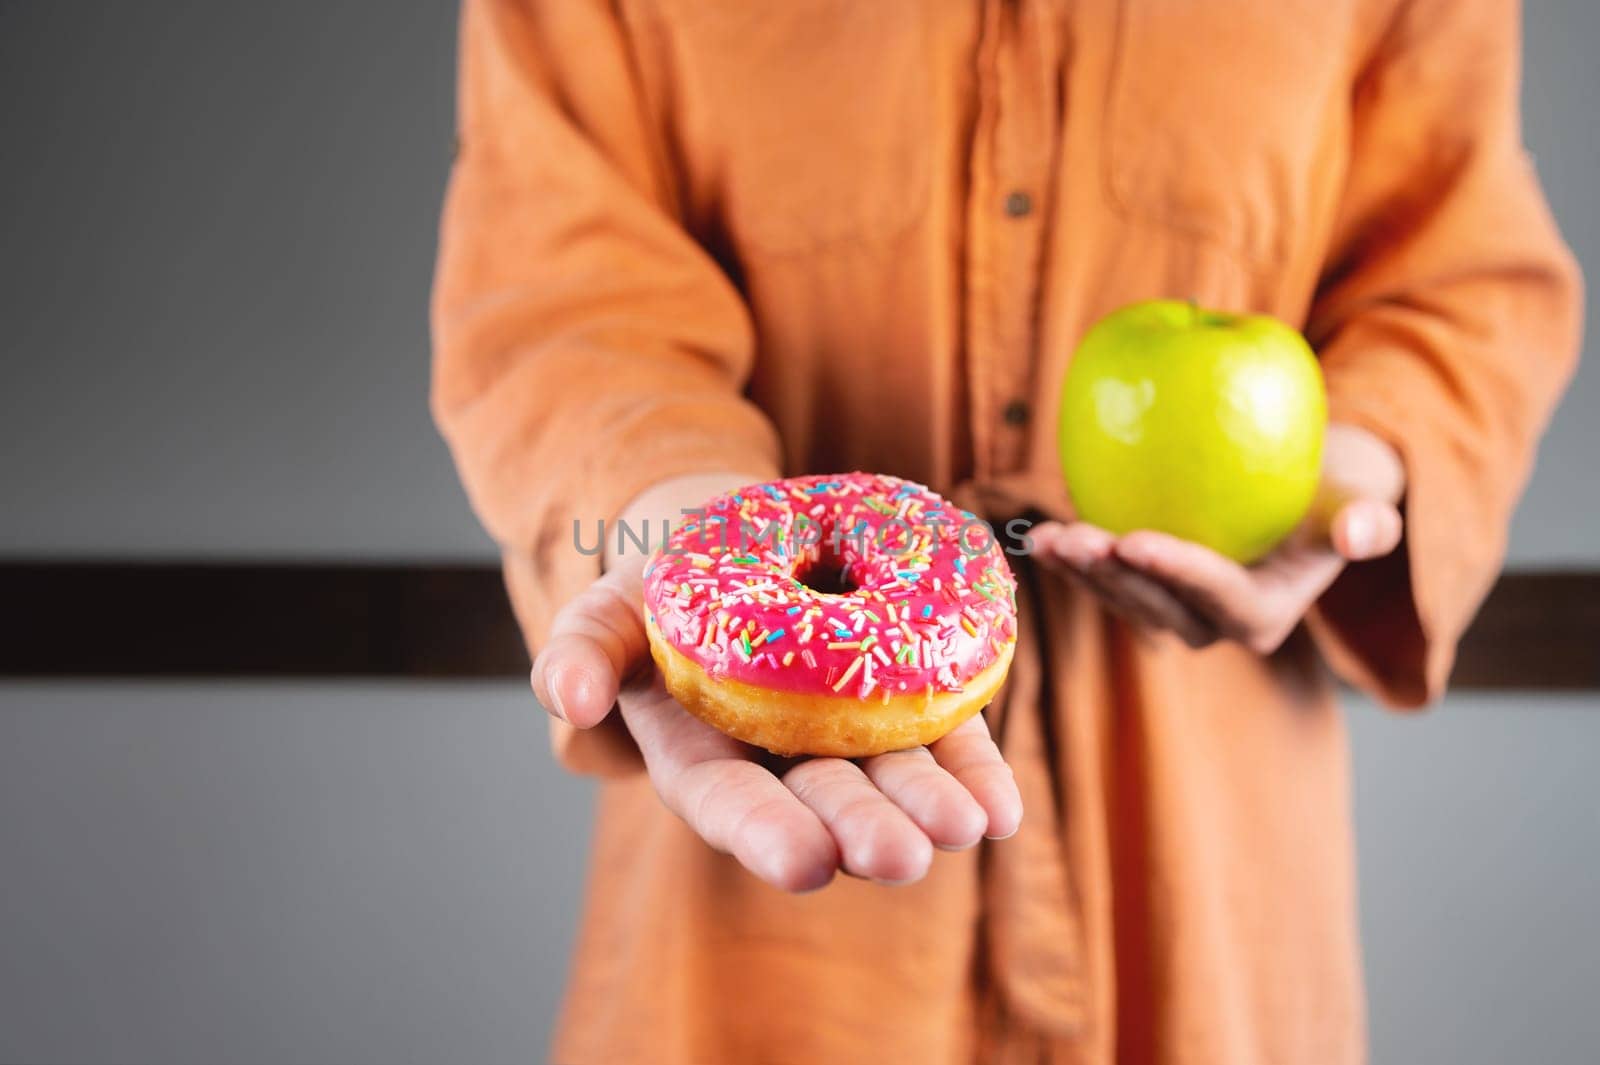 It is difficult to choose a healthy eating concept when a woman is holding a green apple and a donut with a lot of calories in her hand. Unrecognizable girl holding out a donut by yanik88